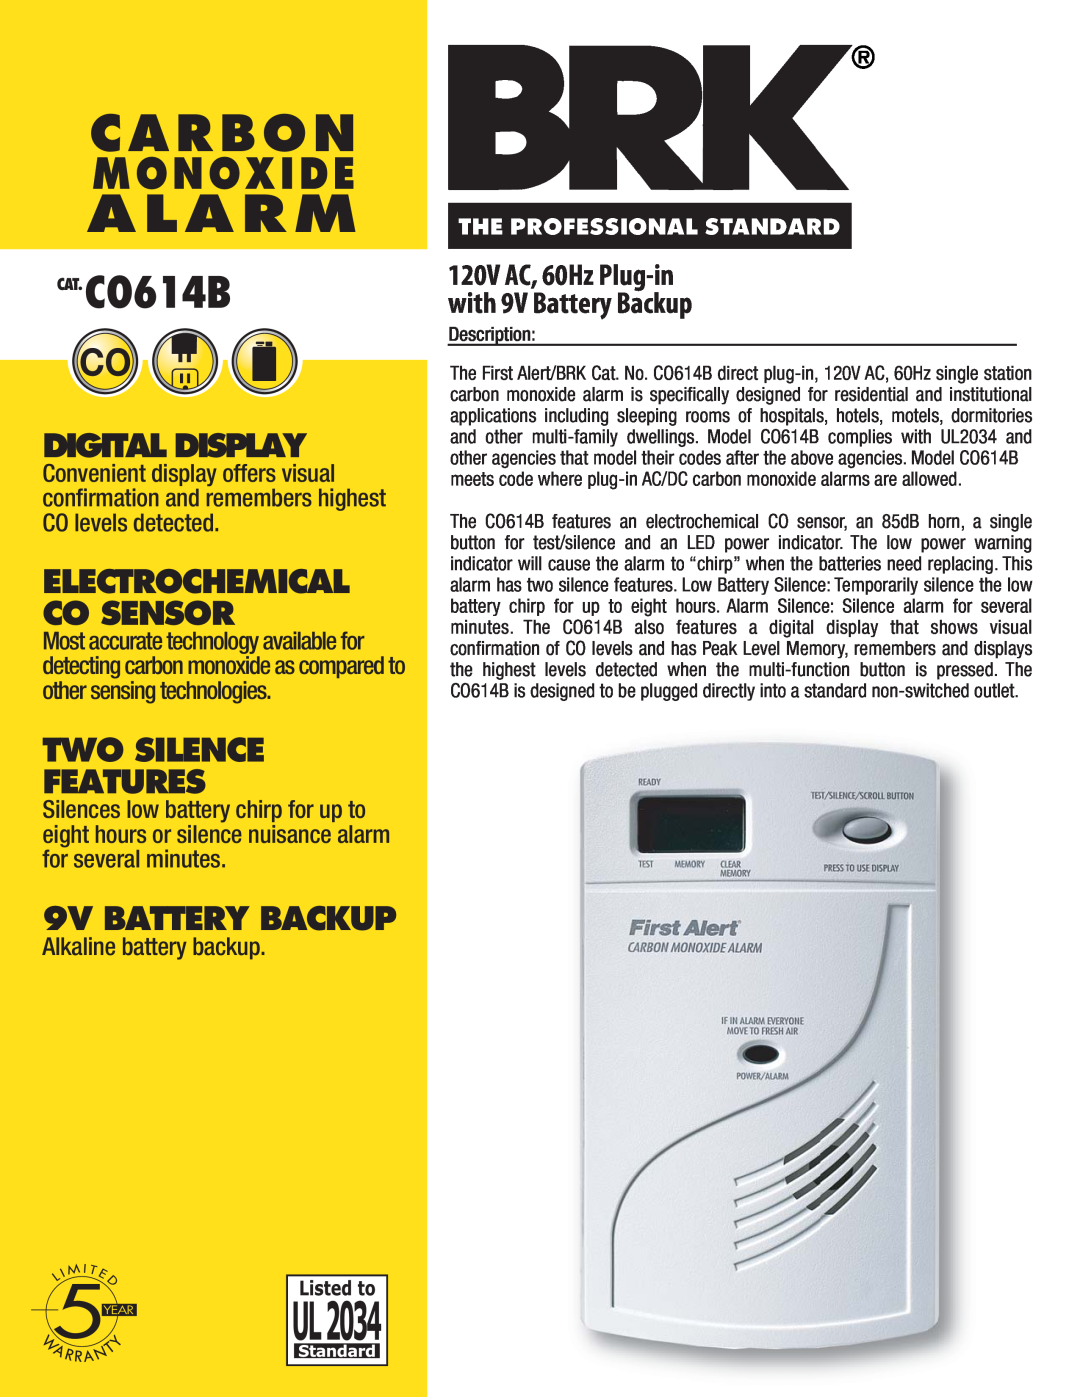 BRK electronic manual Alarm, Carbon, Monoxide, CAT.CO614B, Digital Display, Two Silence Features, 9V BATTERY BACKUP 